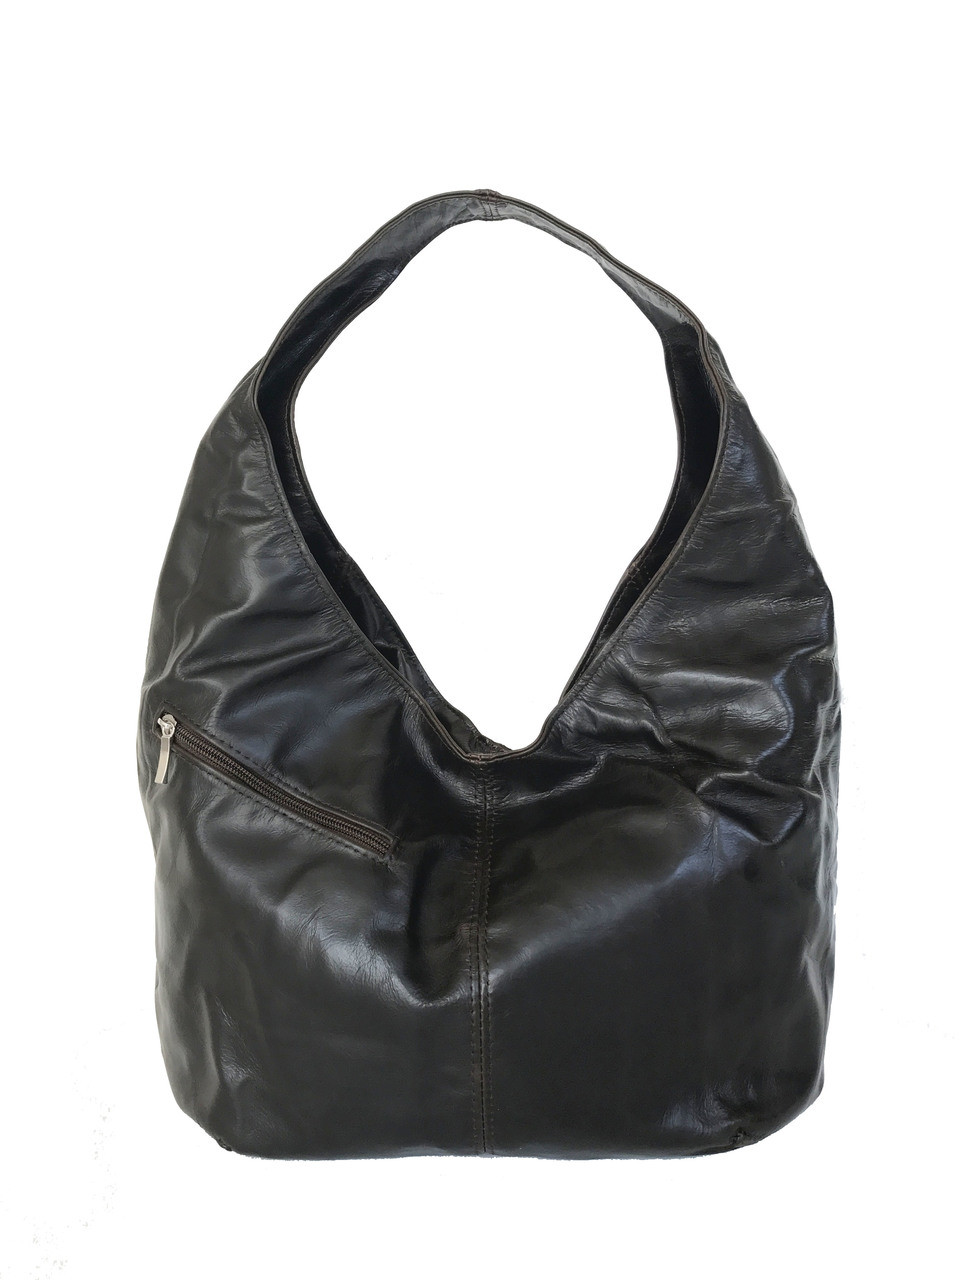 Distressed Leather Hobo Bag w/ Pockets, Trendy Classic Bags, Vintage ...